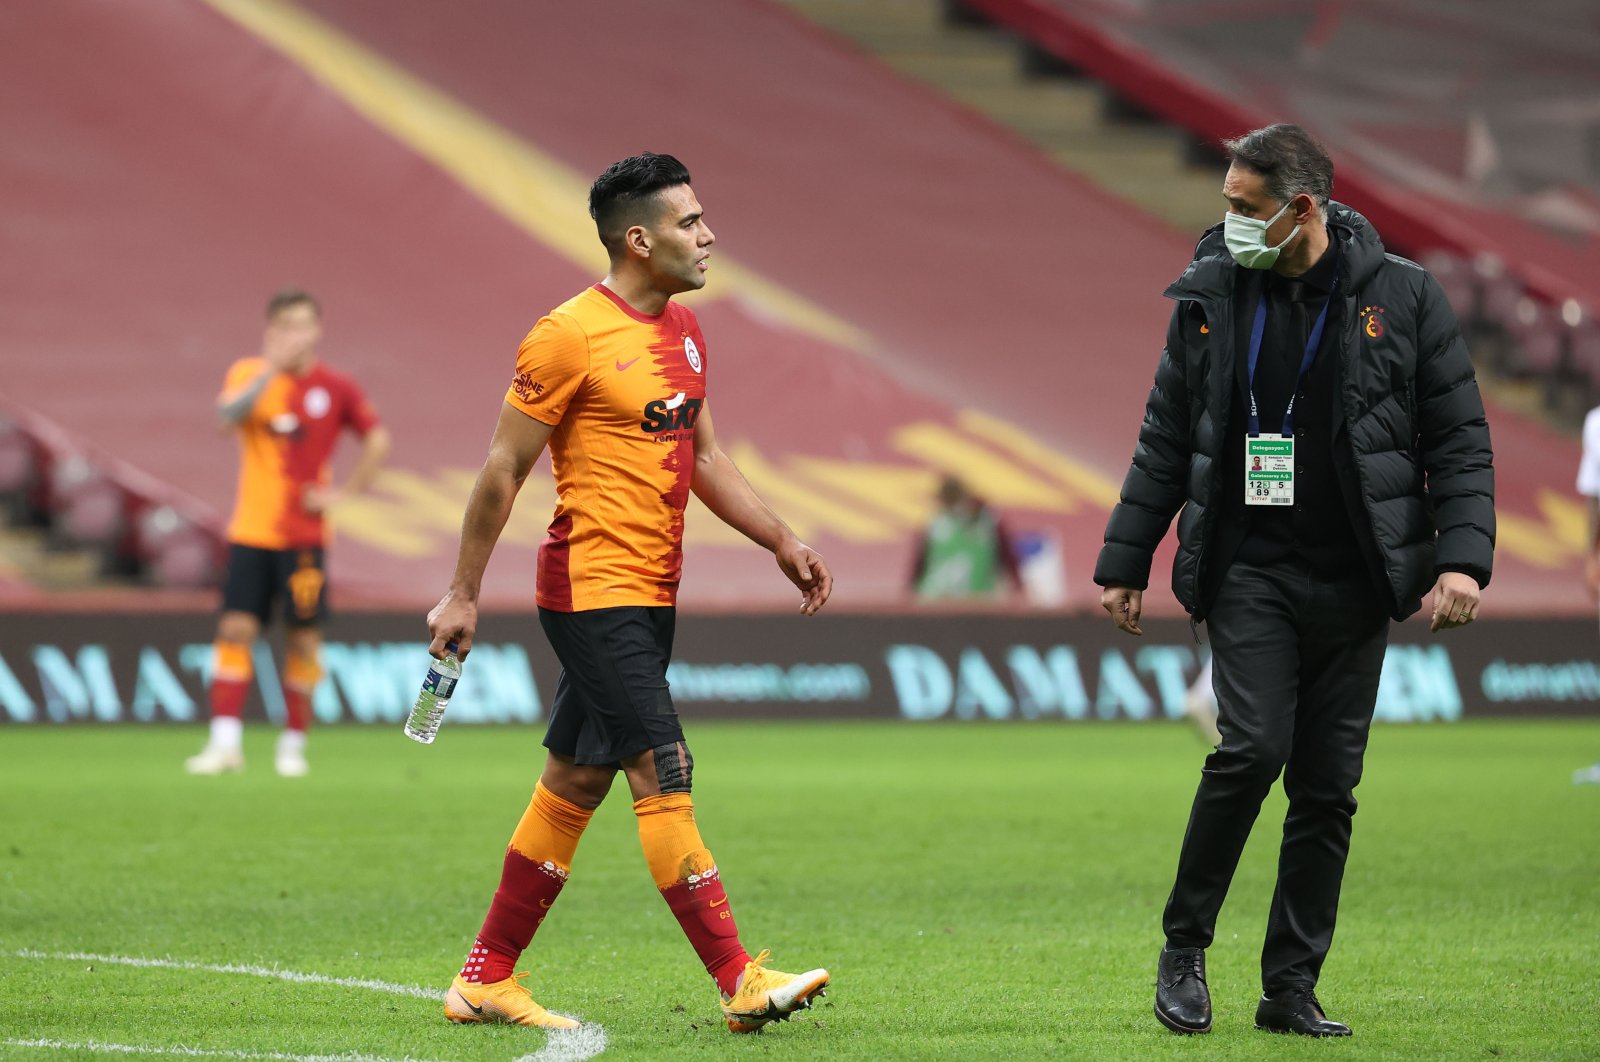 Galatasaray's Radamel Falcao (L) leaves the pitch after an injury during the Süper Lig match against Antalyaspor, Jan. 2, 2021. (AA Photo)
